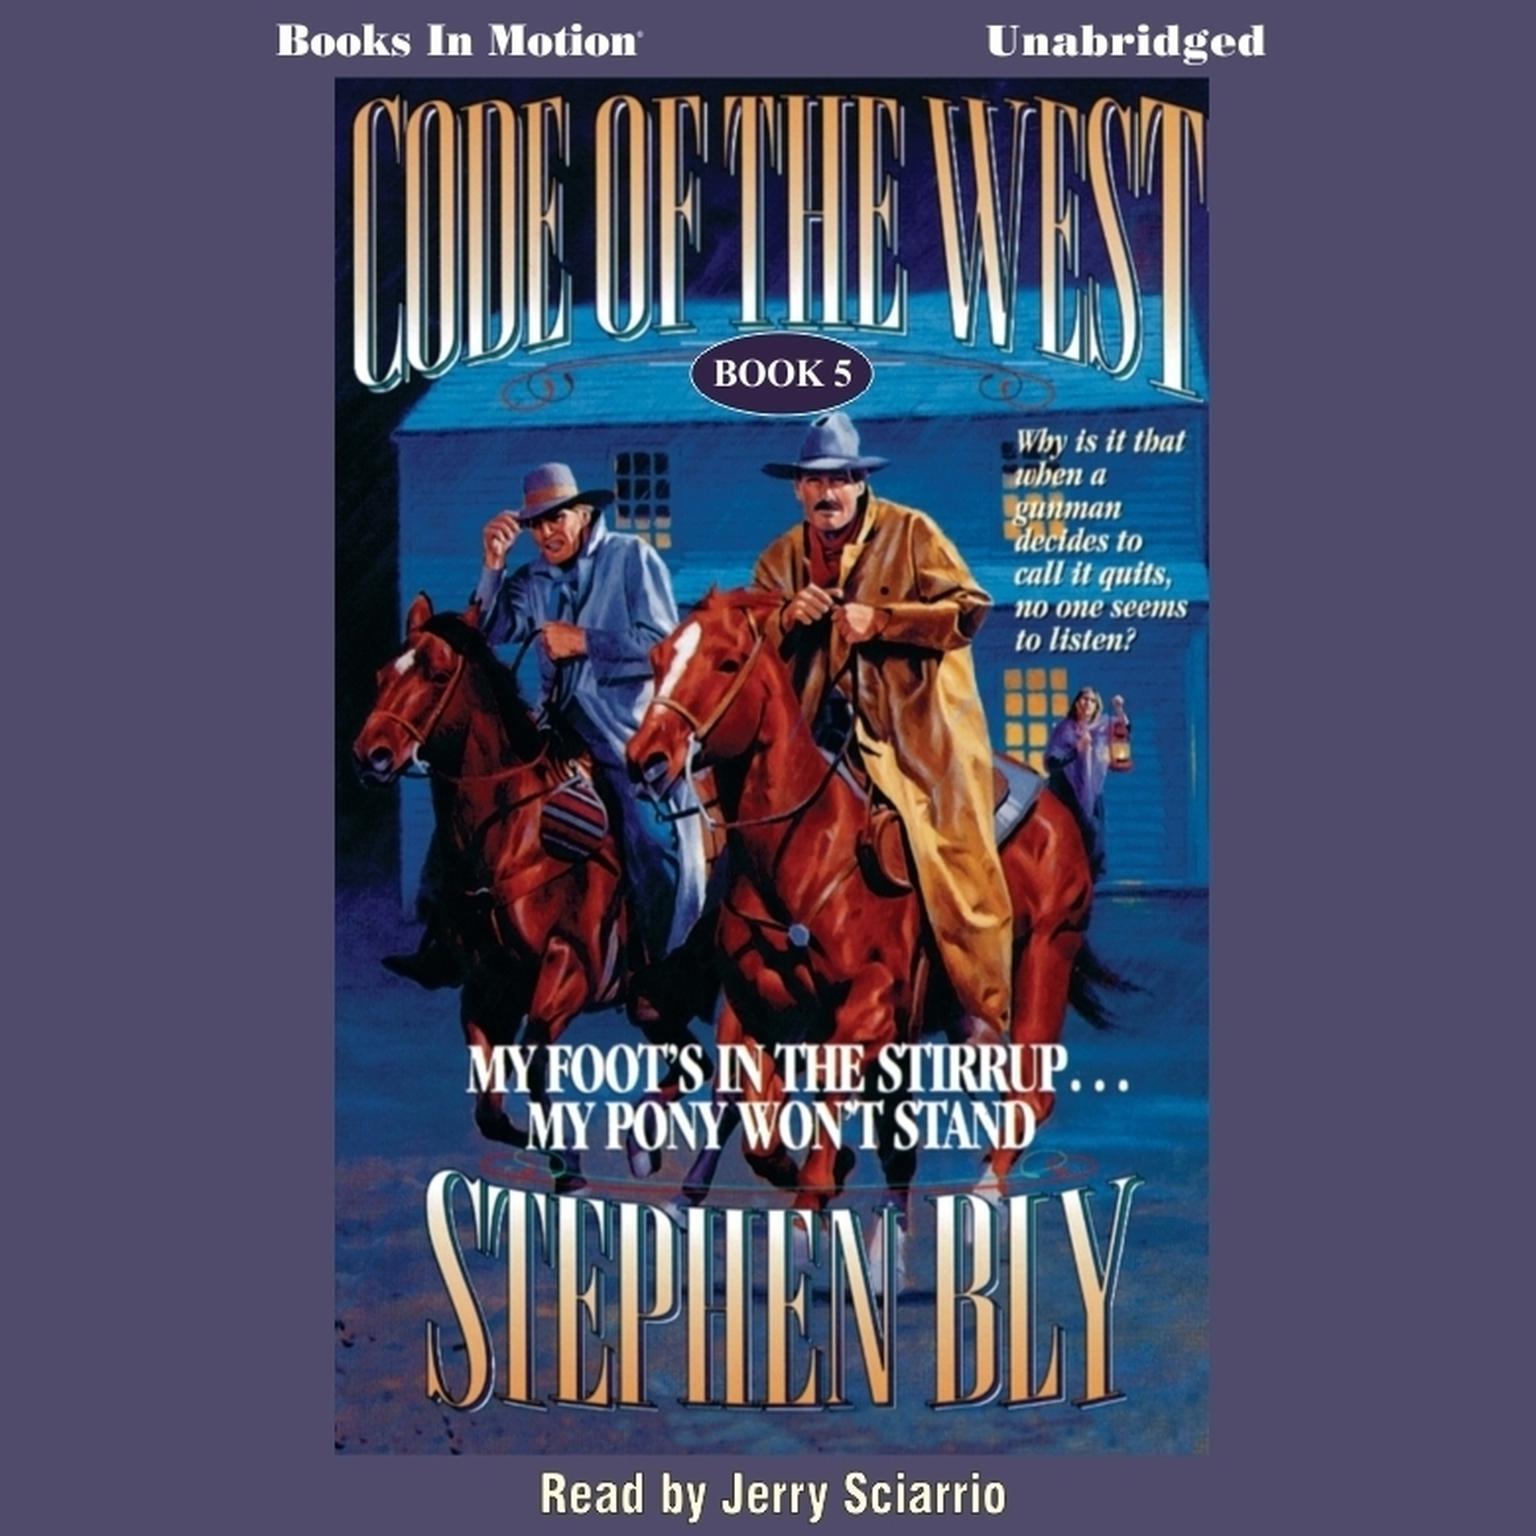 My Foots in the Stirrup..My Pony Wont Stand Audiobook, by Stephen Bly